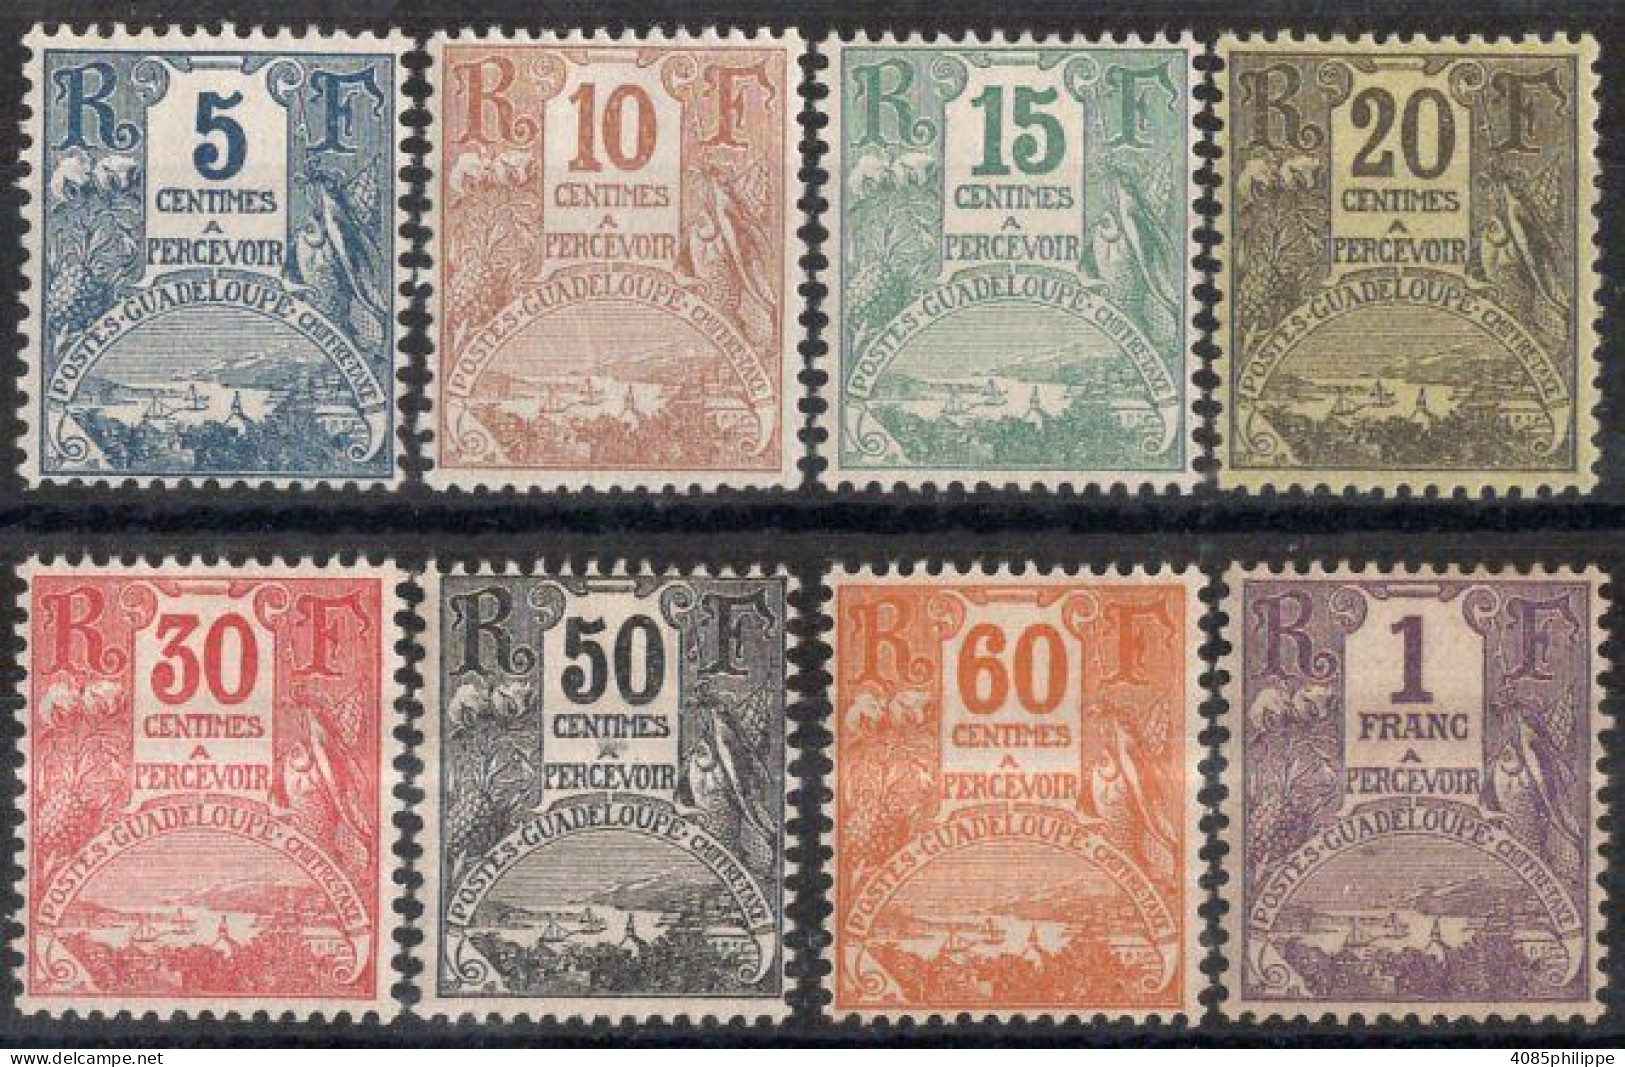 Guadeloupe Timbres-Taxe N°15 à 22* Neufs Charnières TB Cote 19€00 - Postage Due